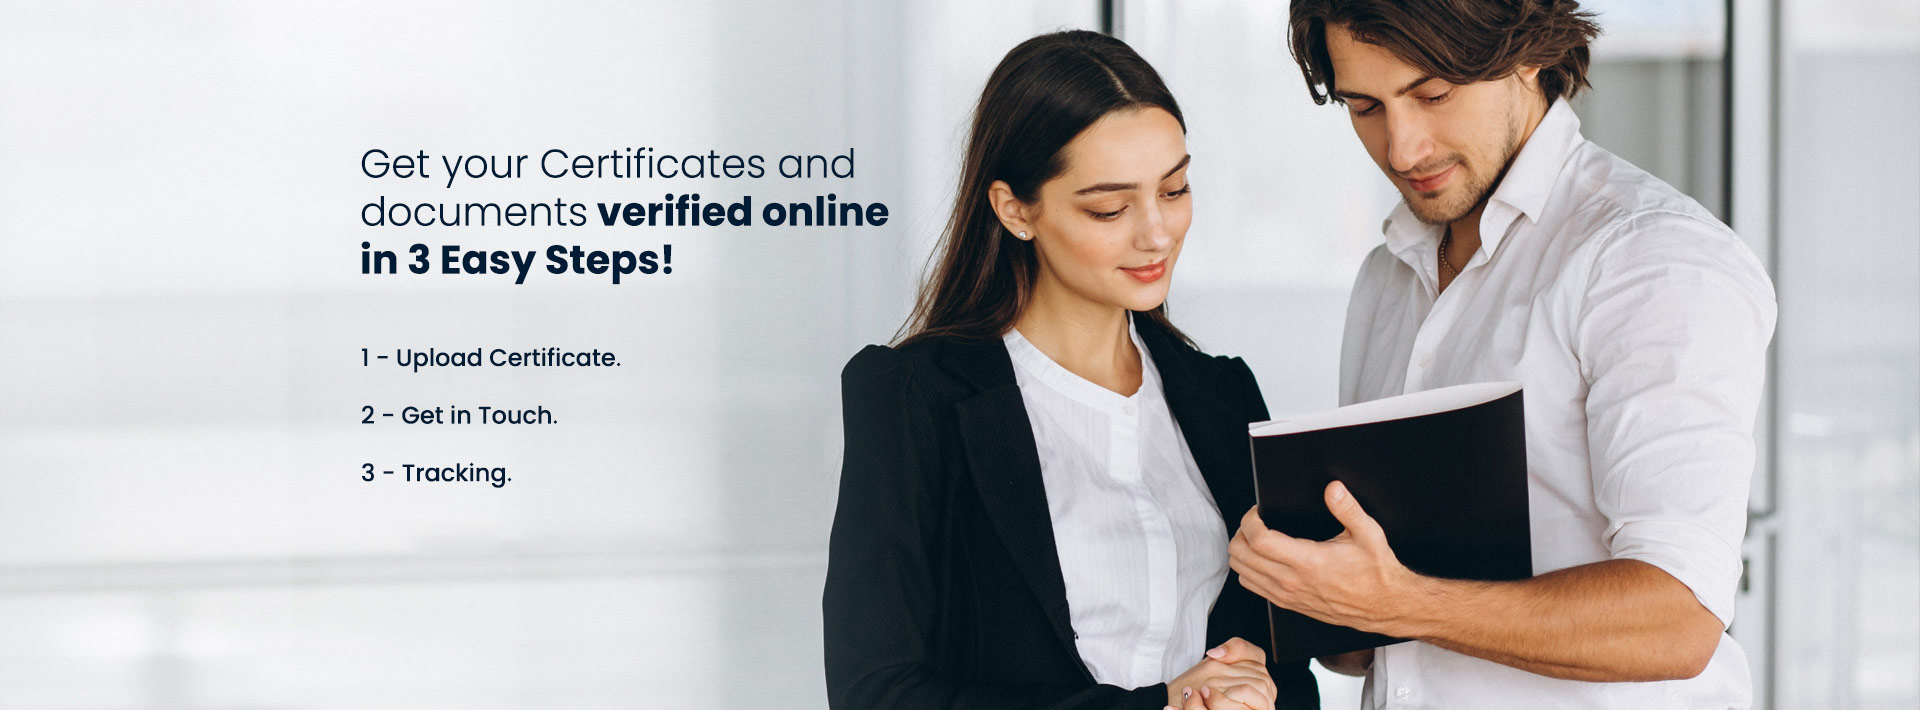 Get your Certificates and documents verified online in 3 Easy Steps!